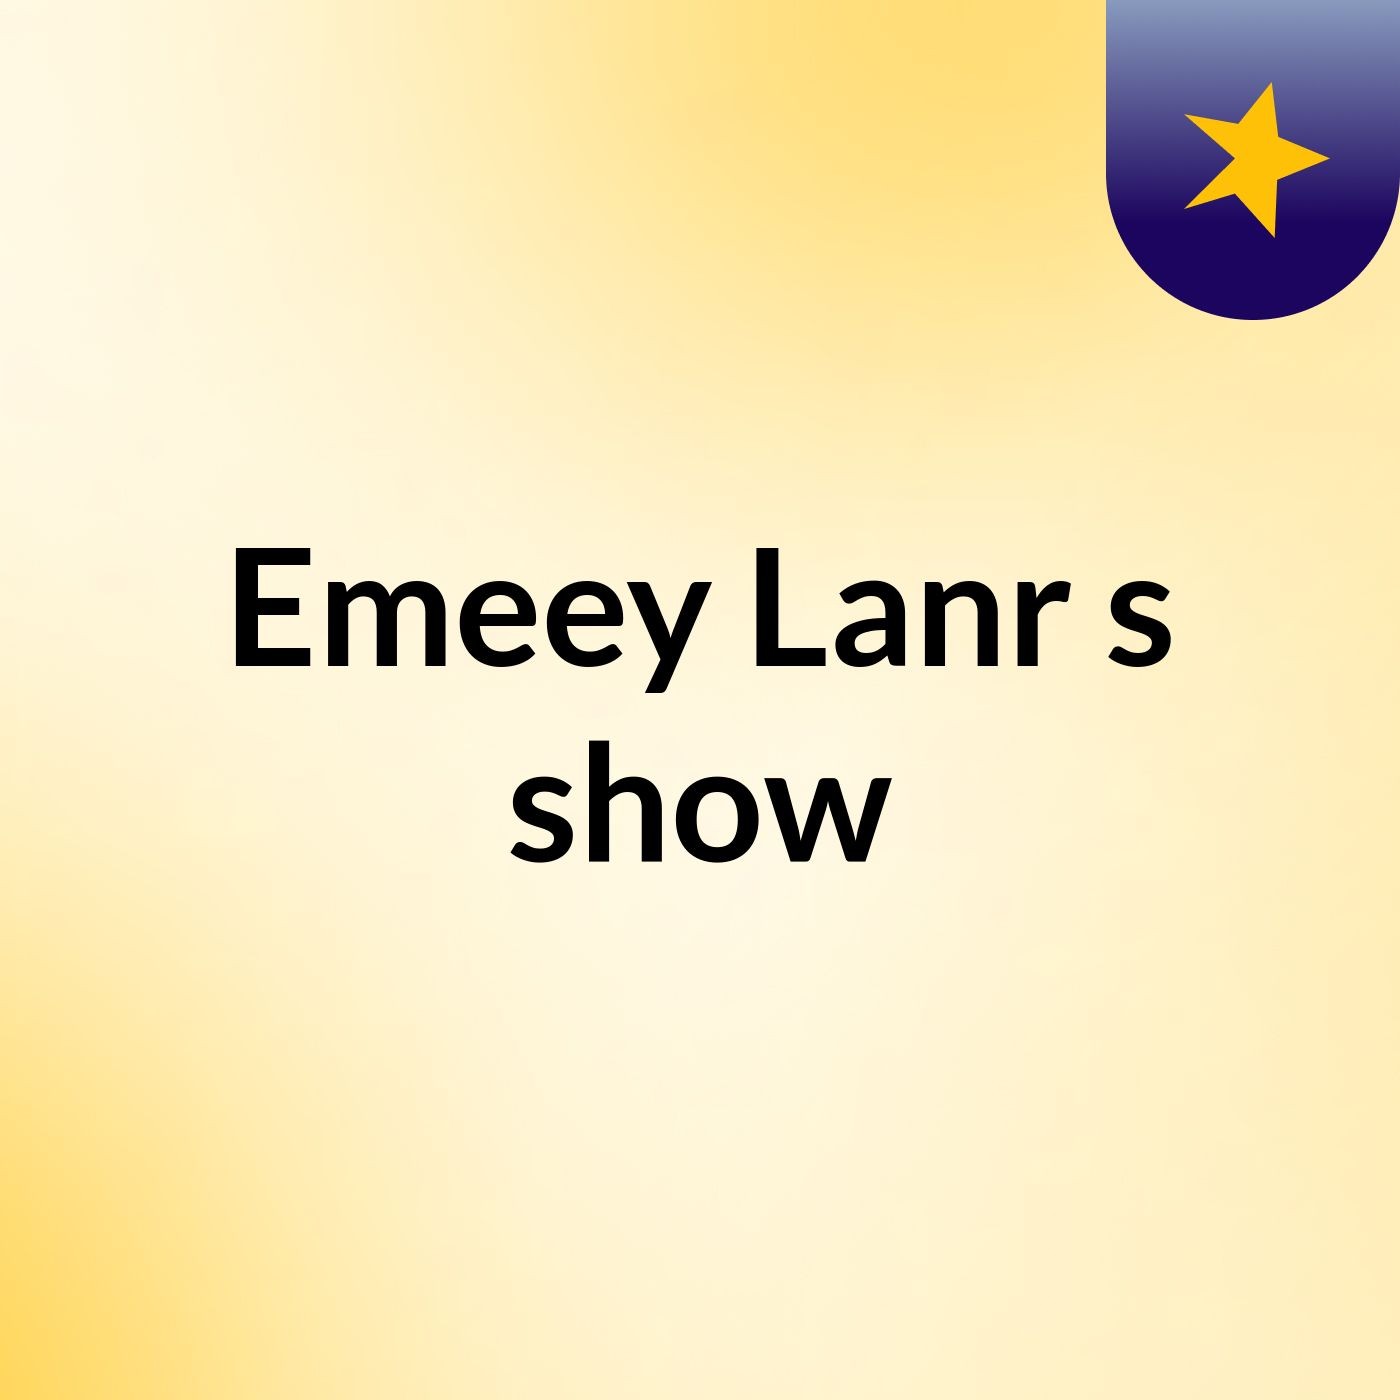 Emeey Lanr's show